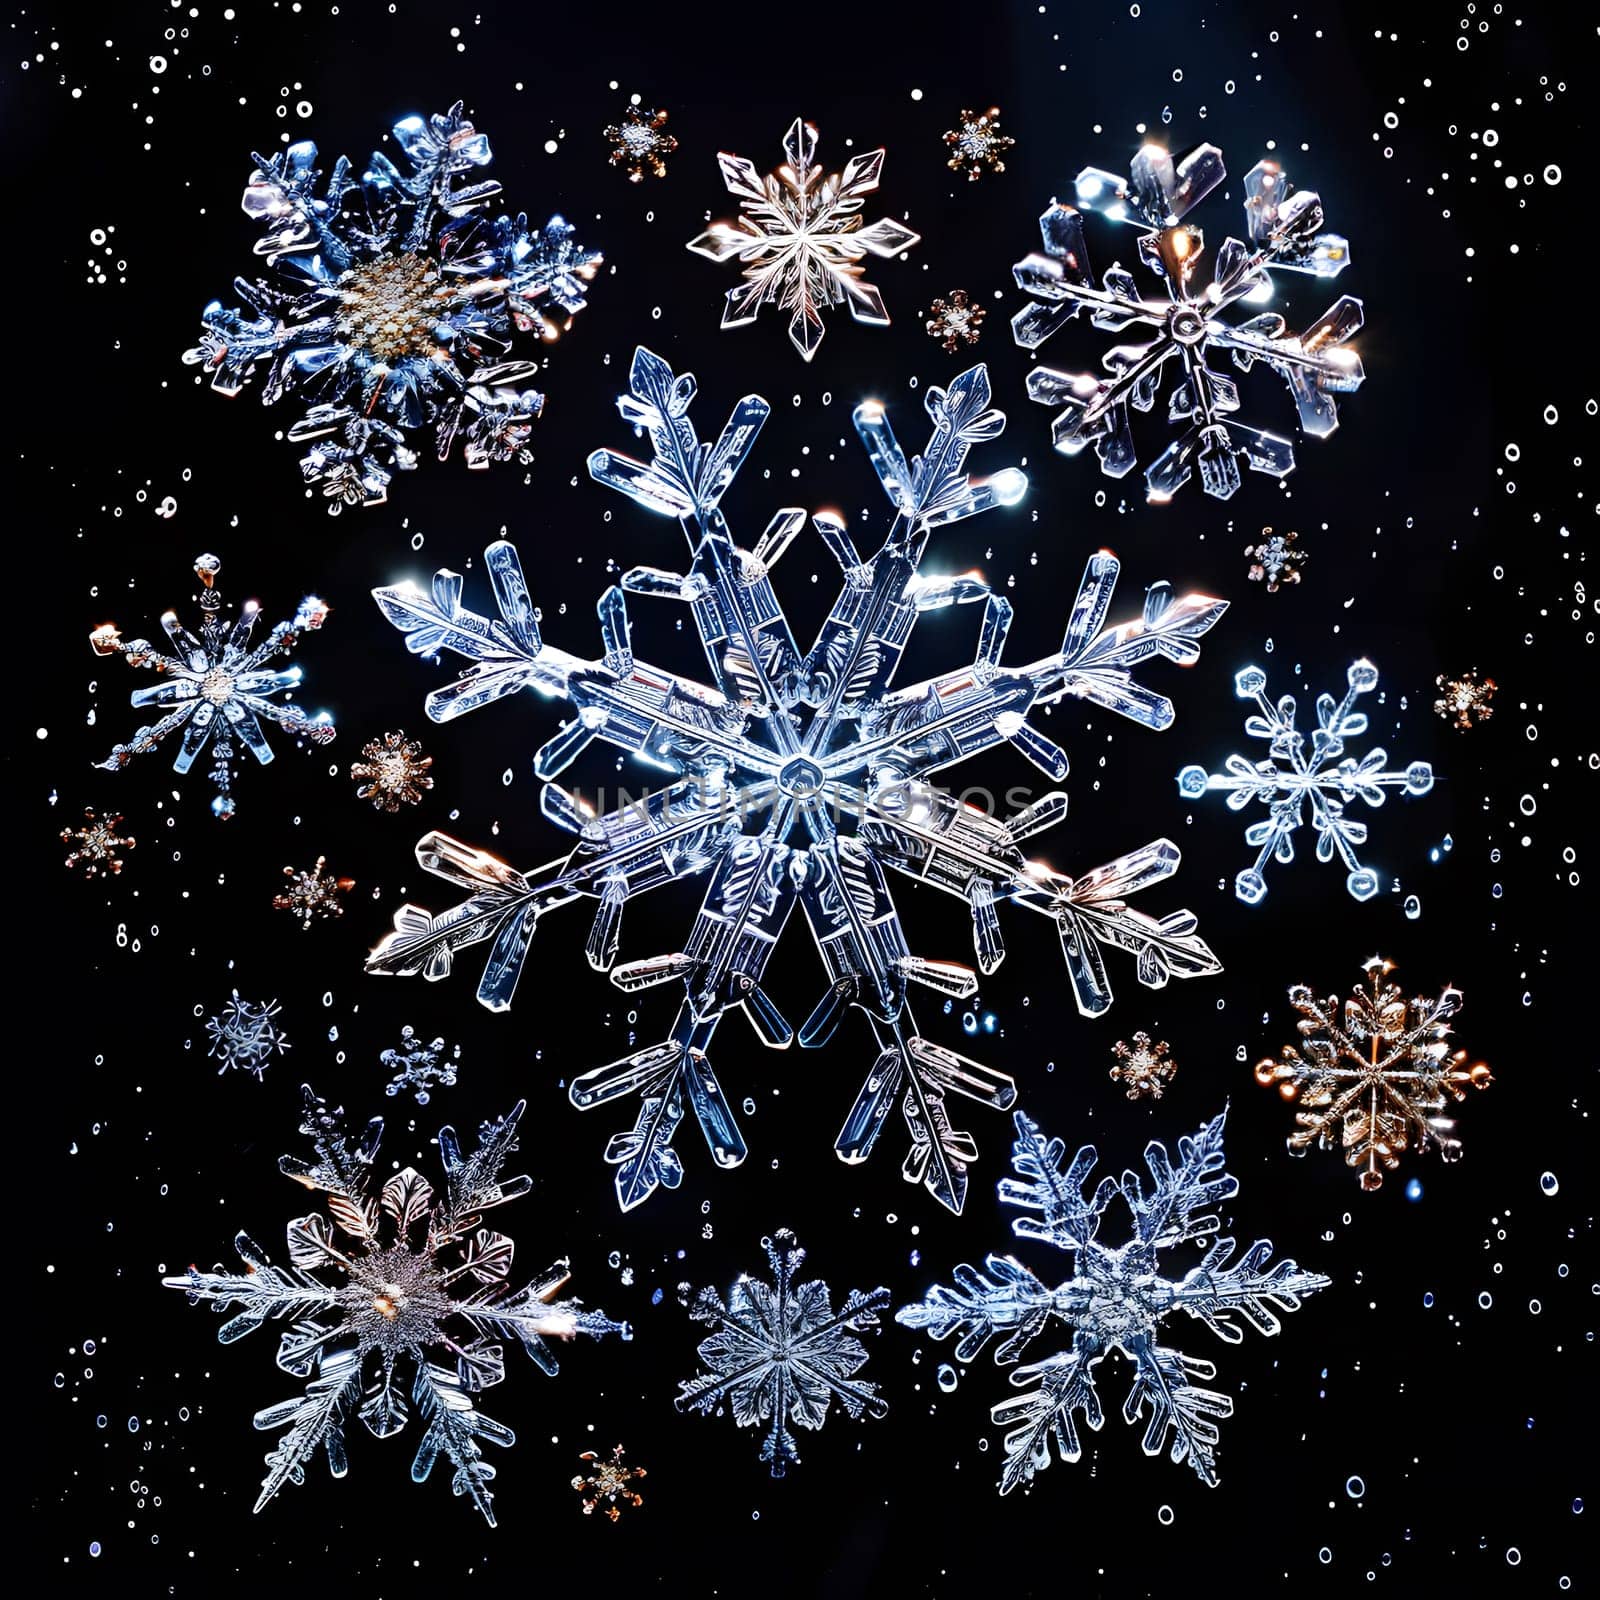 A mesmerizing pattern of electric blue snowflakes on a freezing black background, creating a symmetrical art piece reminiscent of frost on grass. Perfect for a fashion accessory or event decor